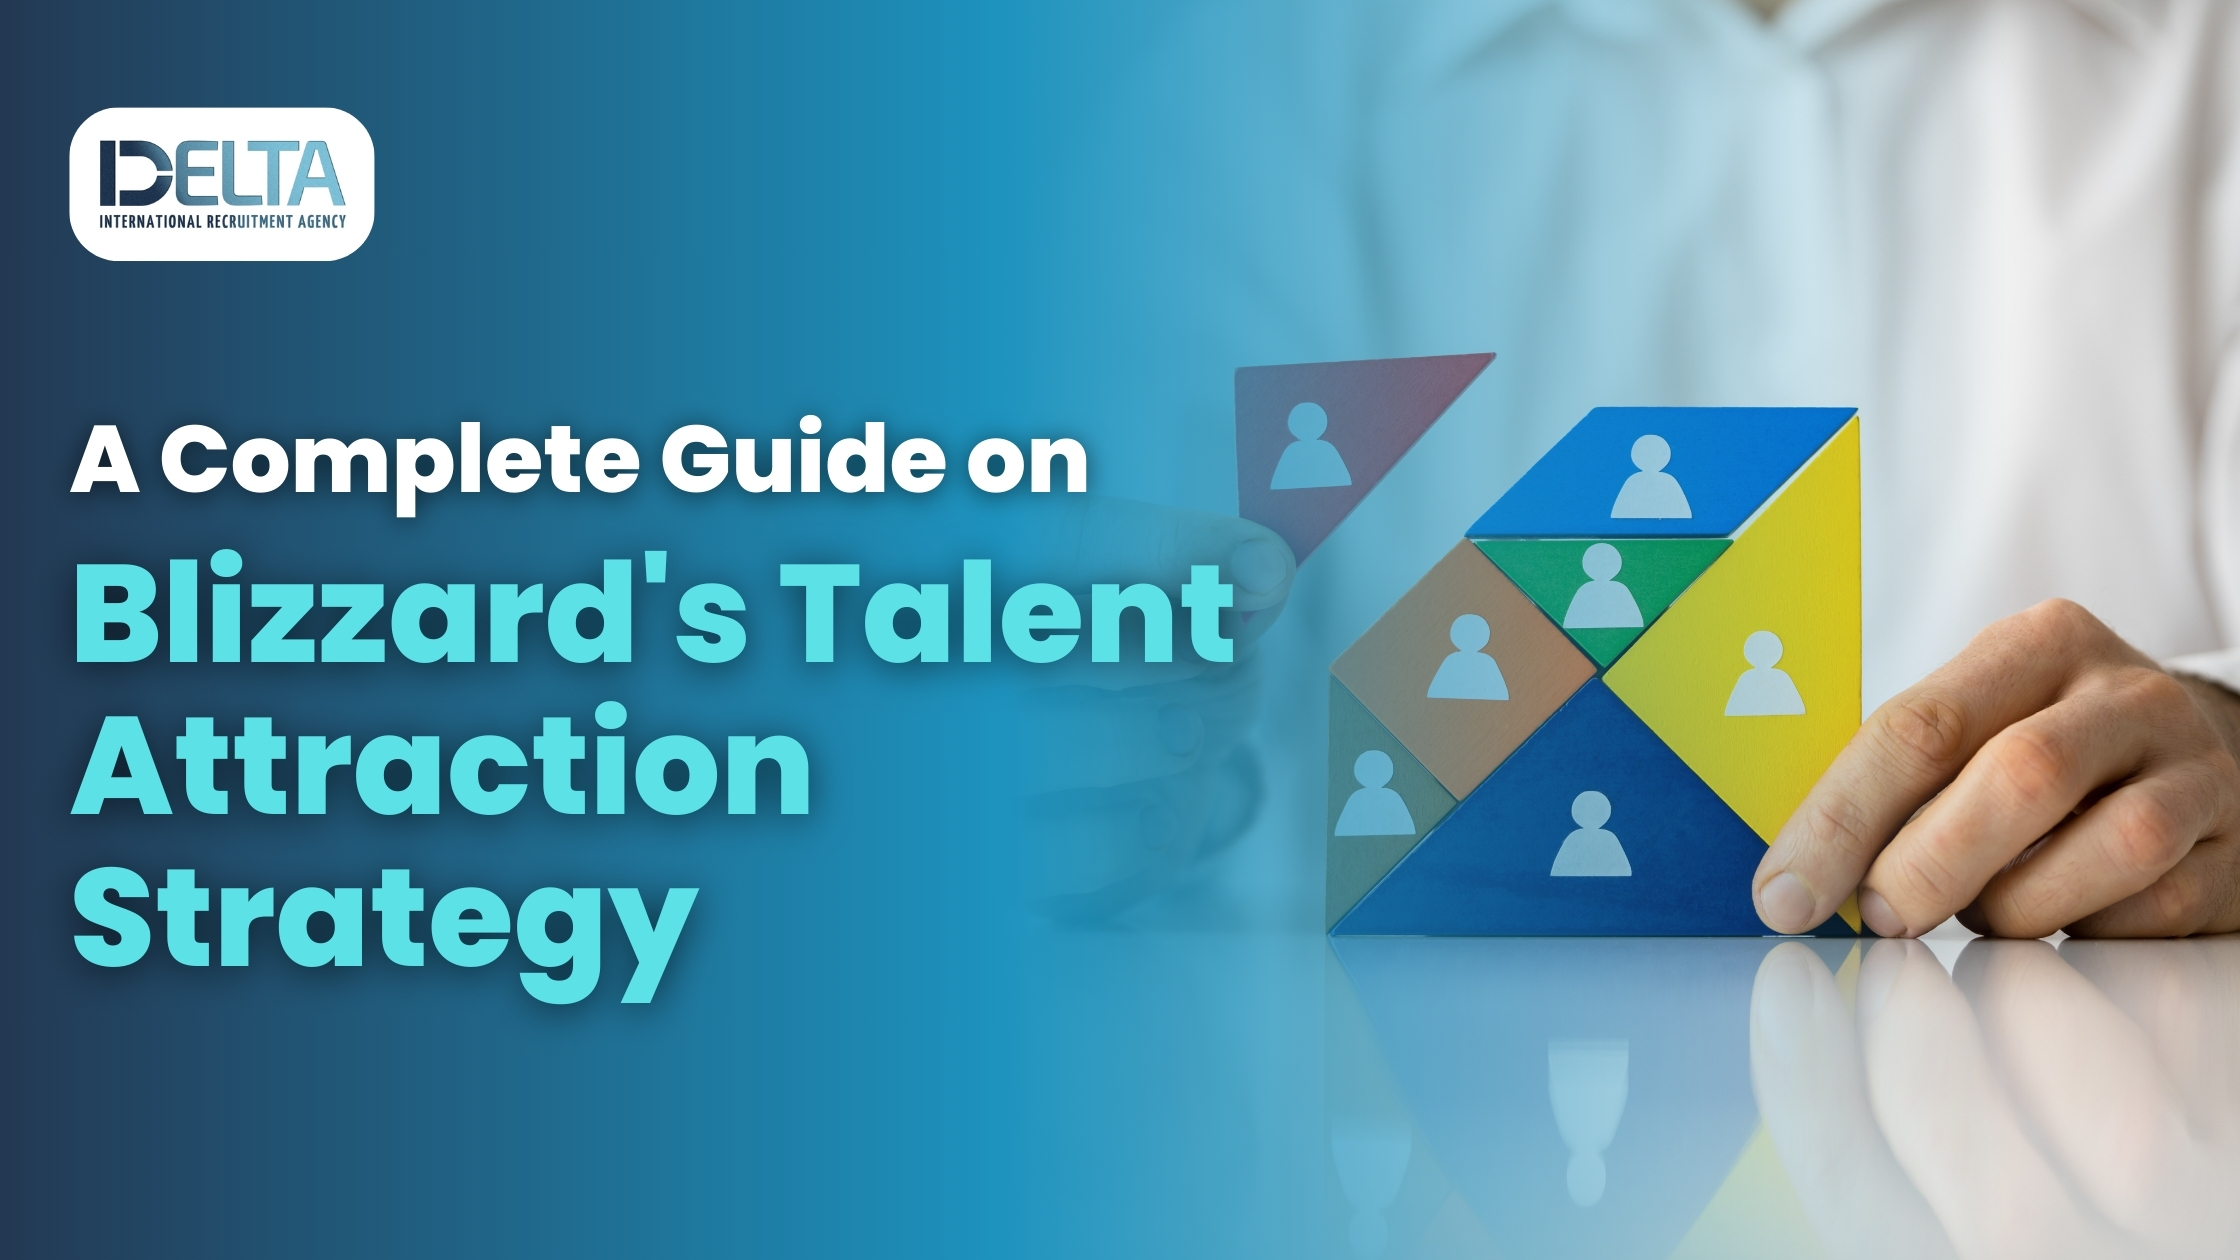 A Complete Guide on Blizzard's Talent Attraction Strategy